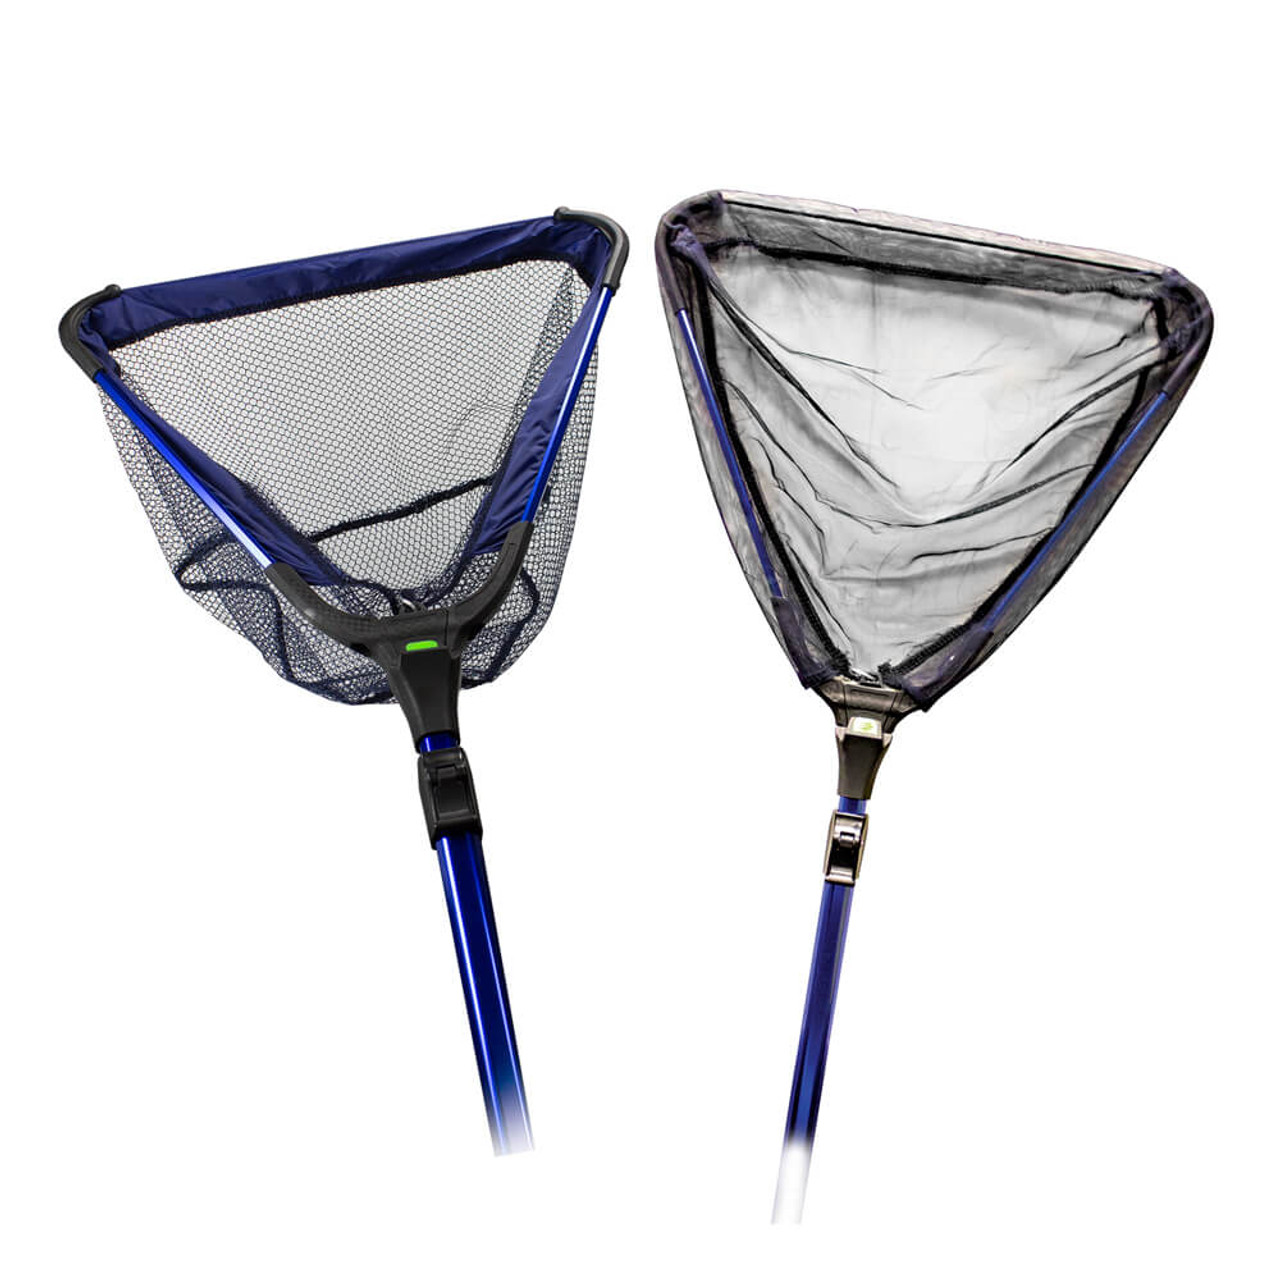 The Pond Guy Collapsible Skimmer & Fish Net